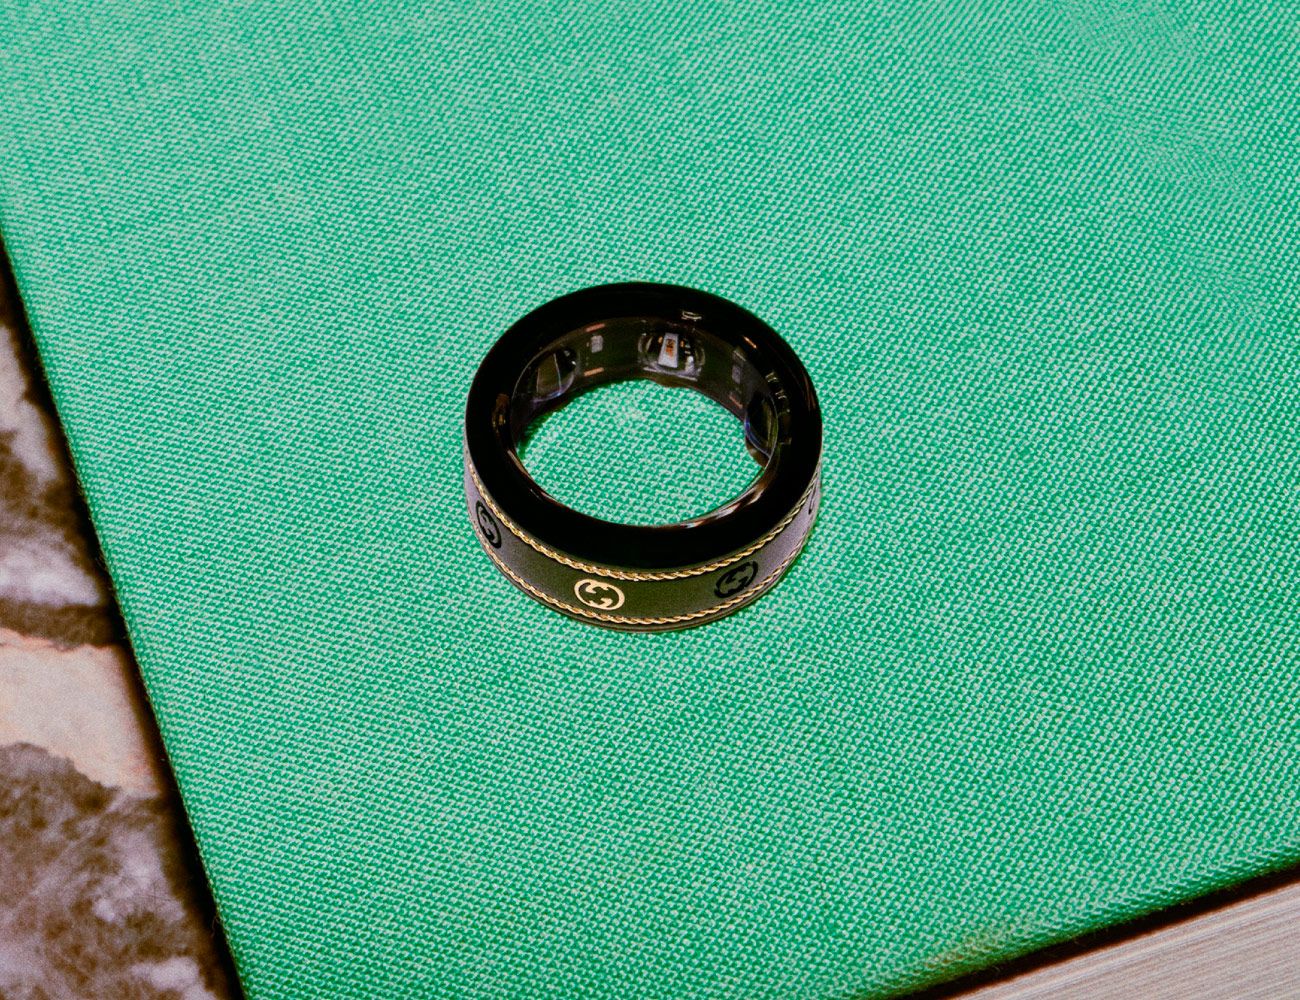 Is Gucci's $950 Oura Ring Worth It? We Did the Math